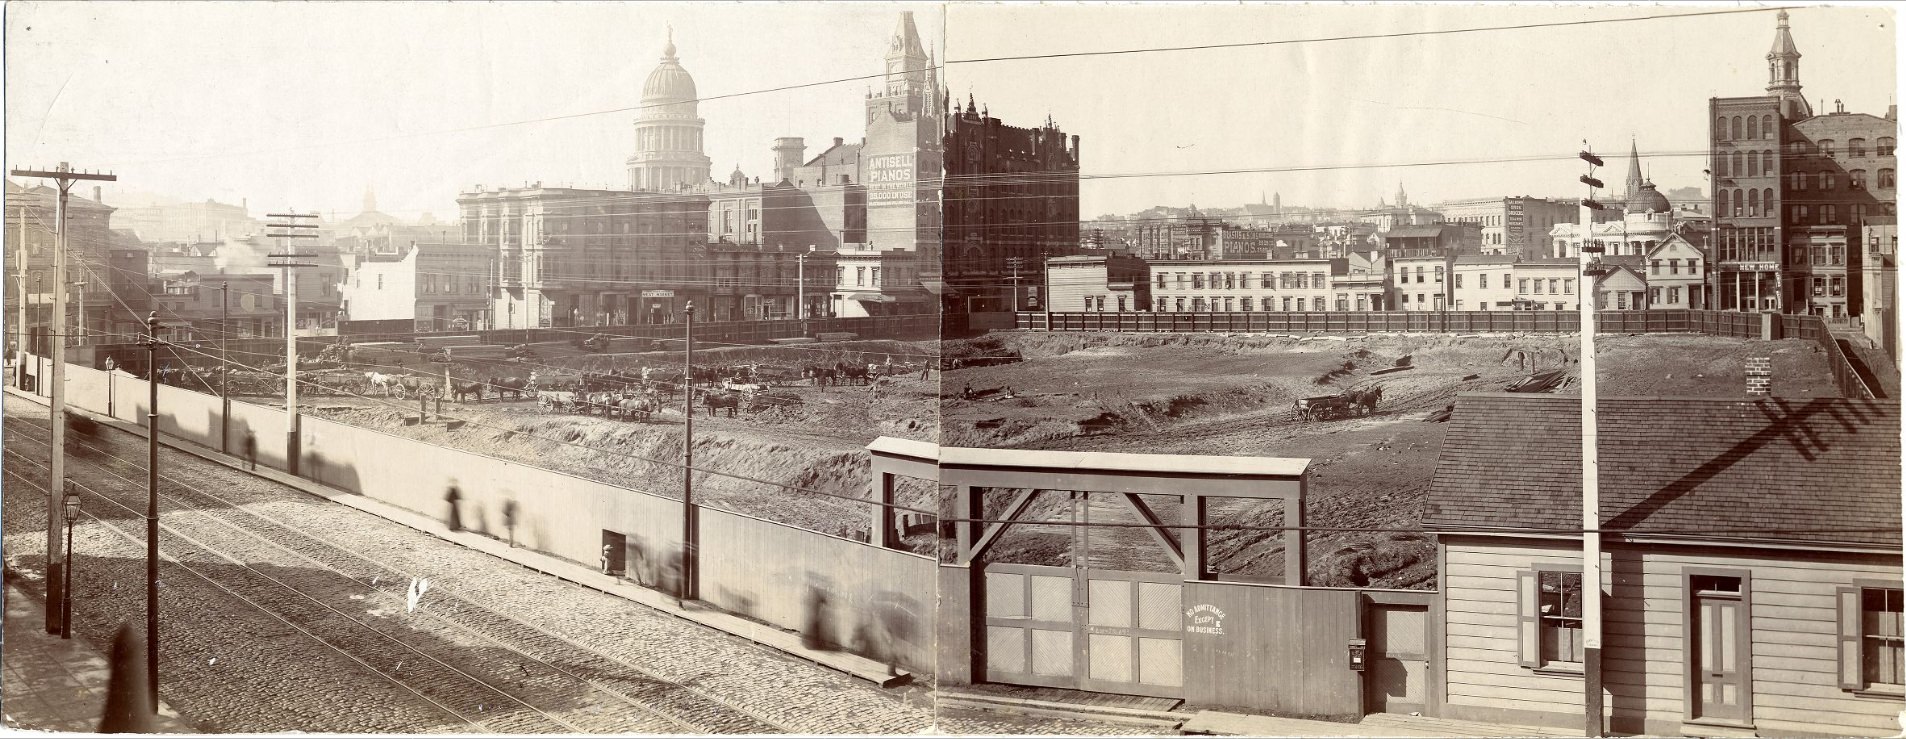 Construction site at Mission and 7th streets, November 1, 1897